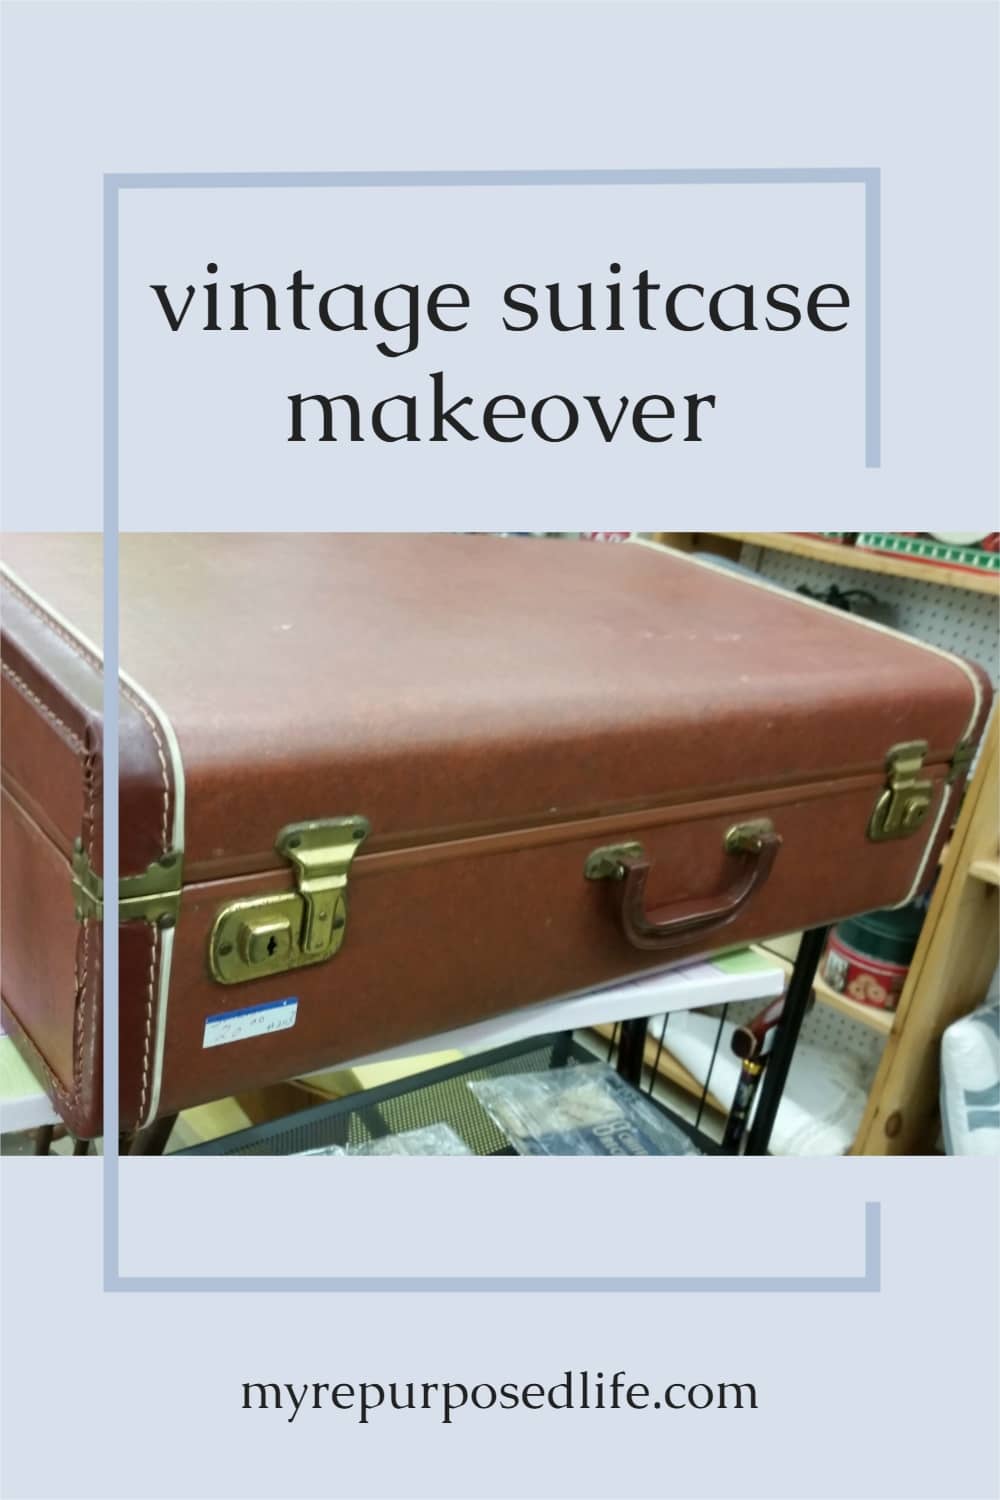 How to give a vintage suitcase a new look with fabric. Tips on making the liner and installing it in your old suitcase. Paint if you wish! Suitcases are readily available at thrift stores! #MyRepurposedLife #vintage #suitcase #upcycle #fabric #eiffeltower via @repurposedlife